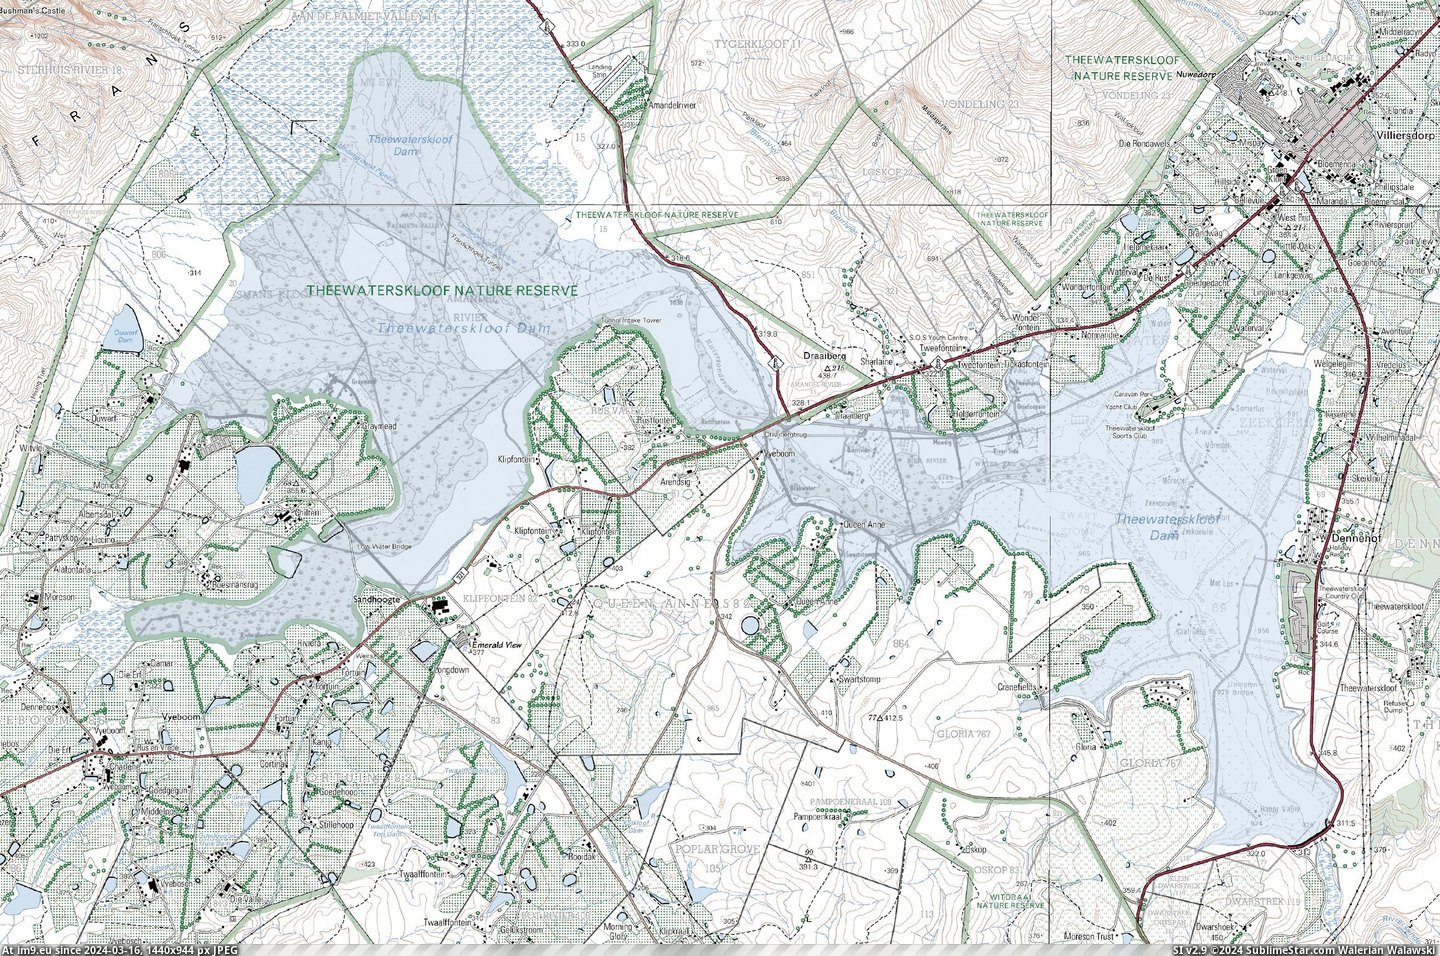 #Old #Map #Beneath #Reservoir #Lies #Dam [Mapporn] What lies beneath Theewaterskloof Dam: blending a contemporary map of the reservoir with an old map from before the da Pic. (Image of album My r/MAPS favs))